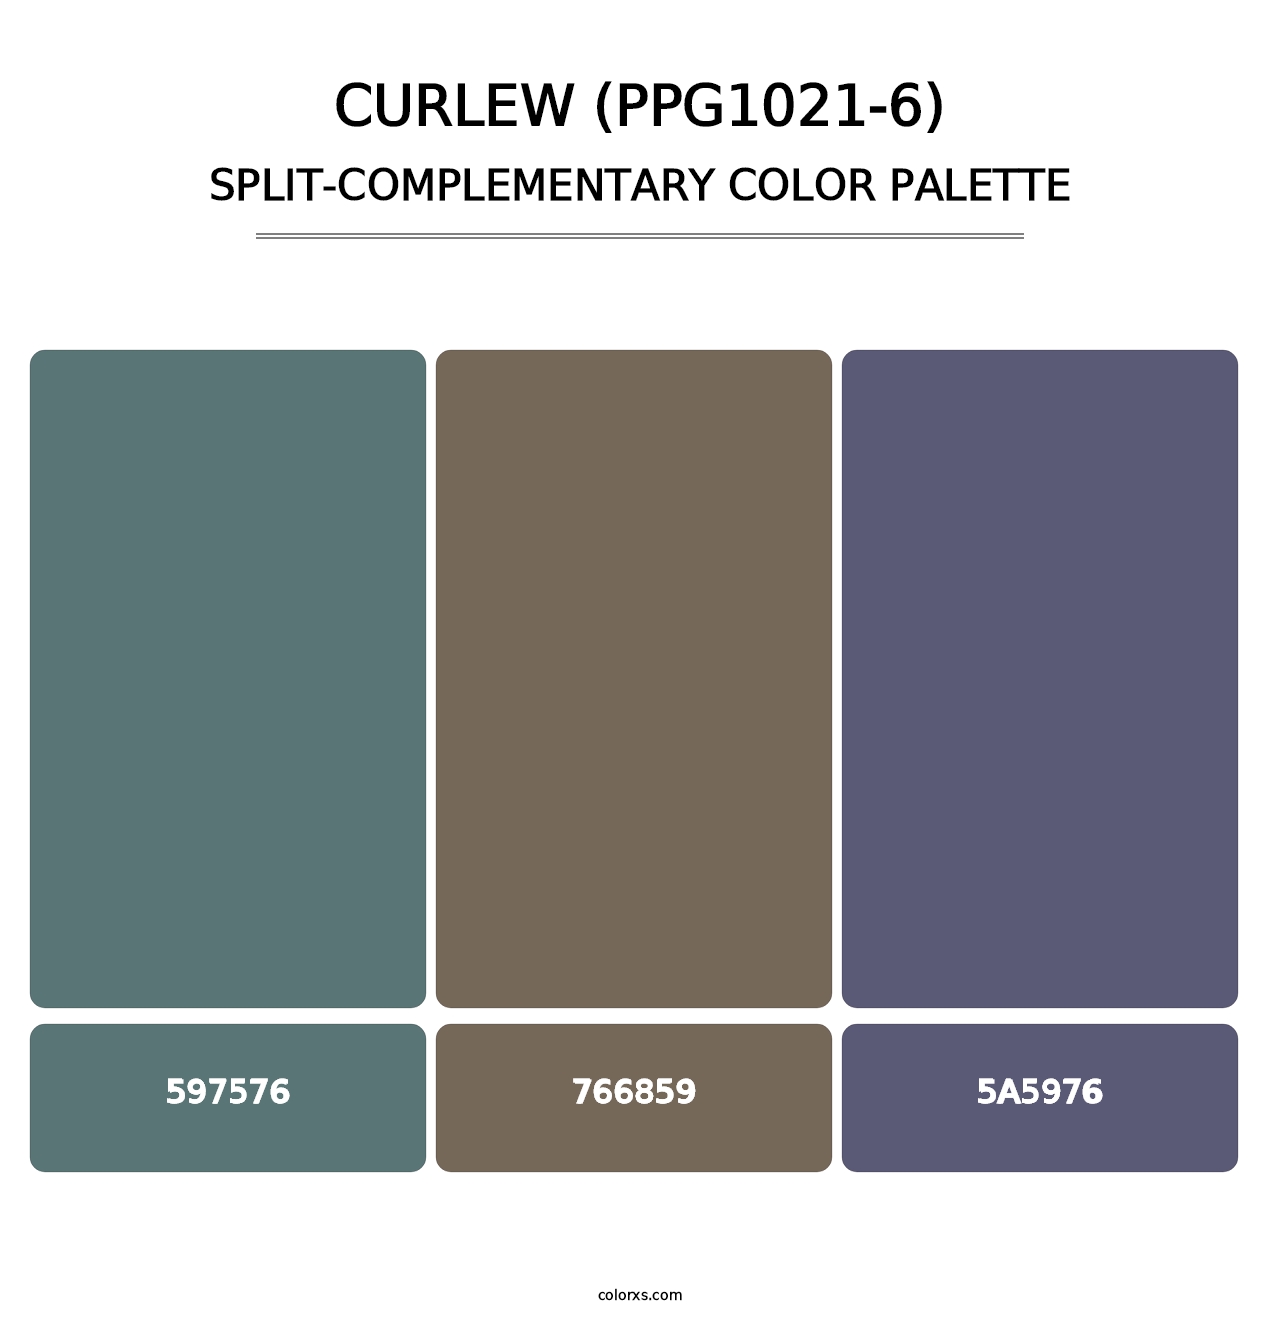 Curlew (PPG1021-6) - Split-Complementary Color Palette